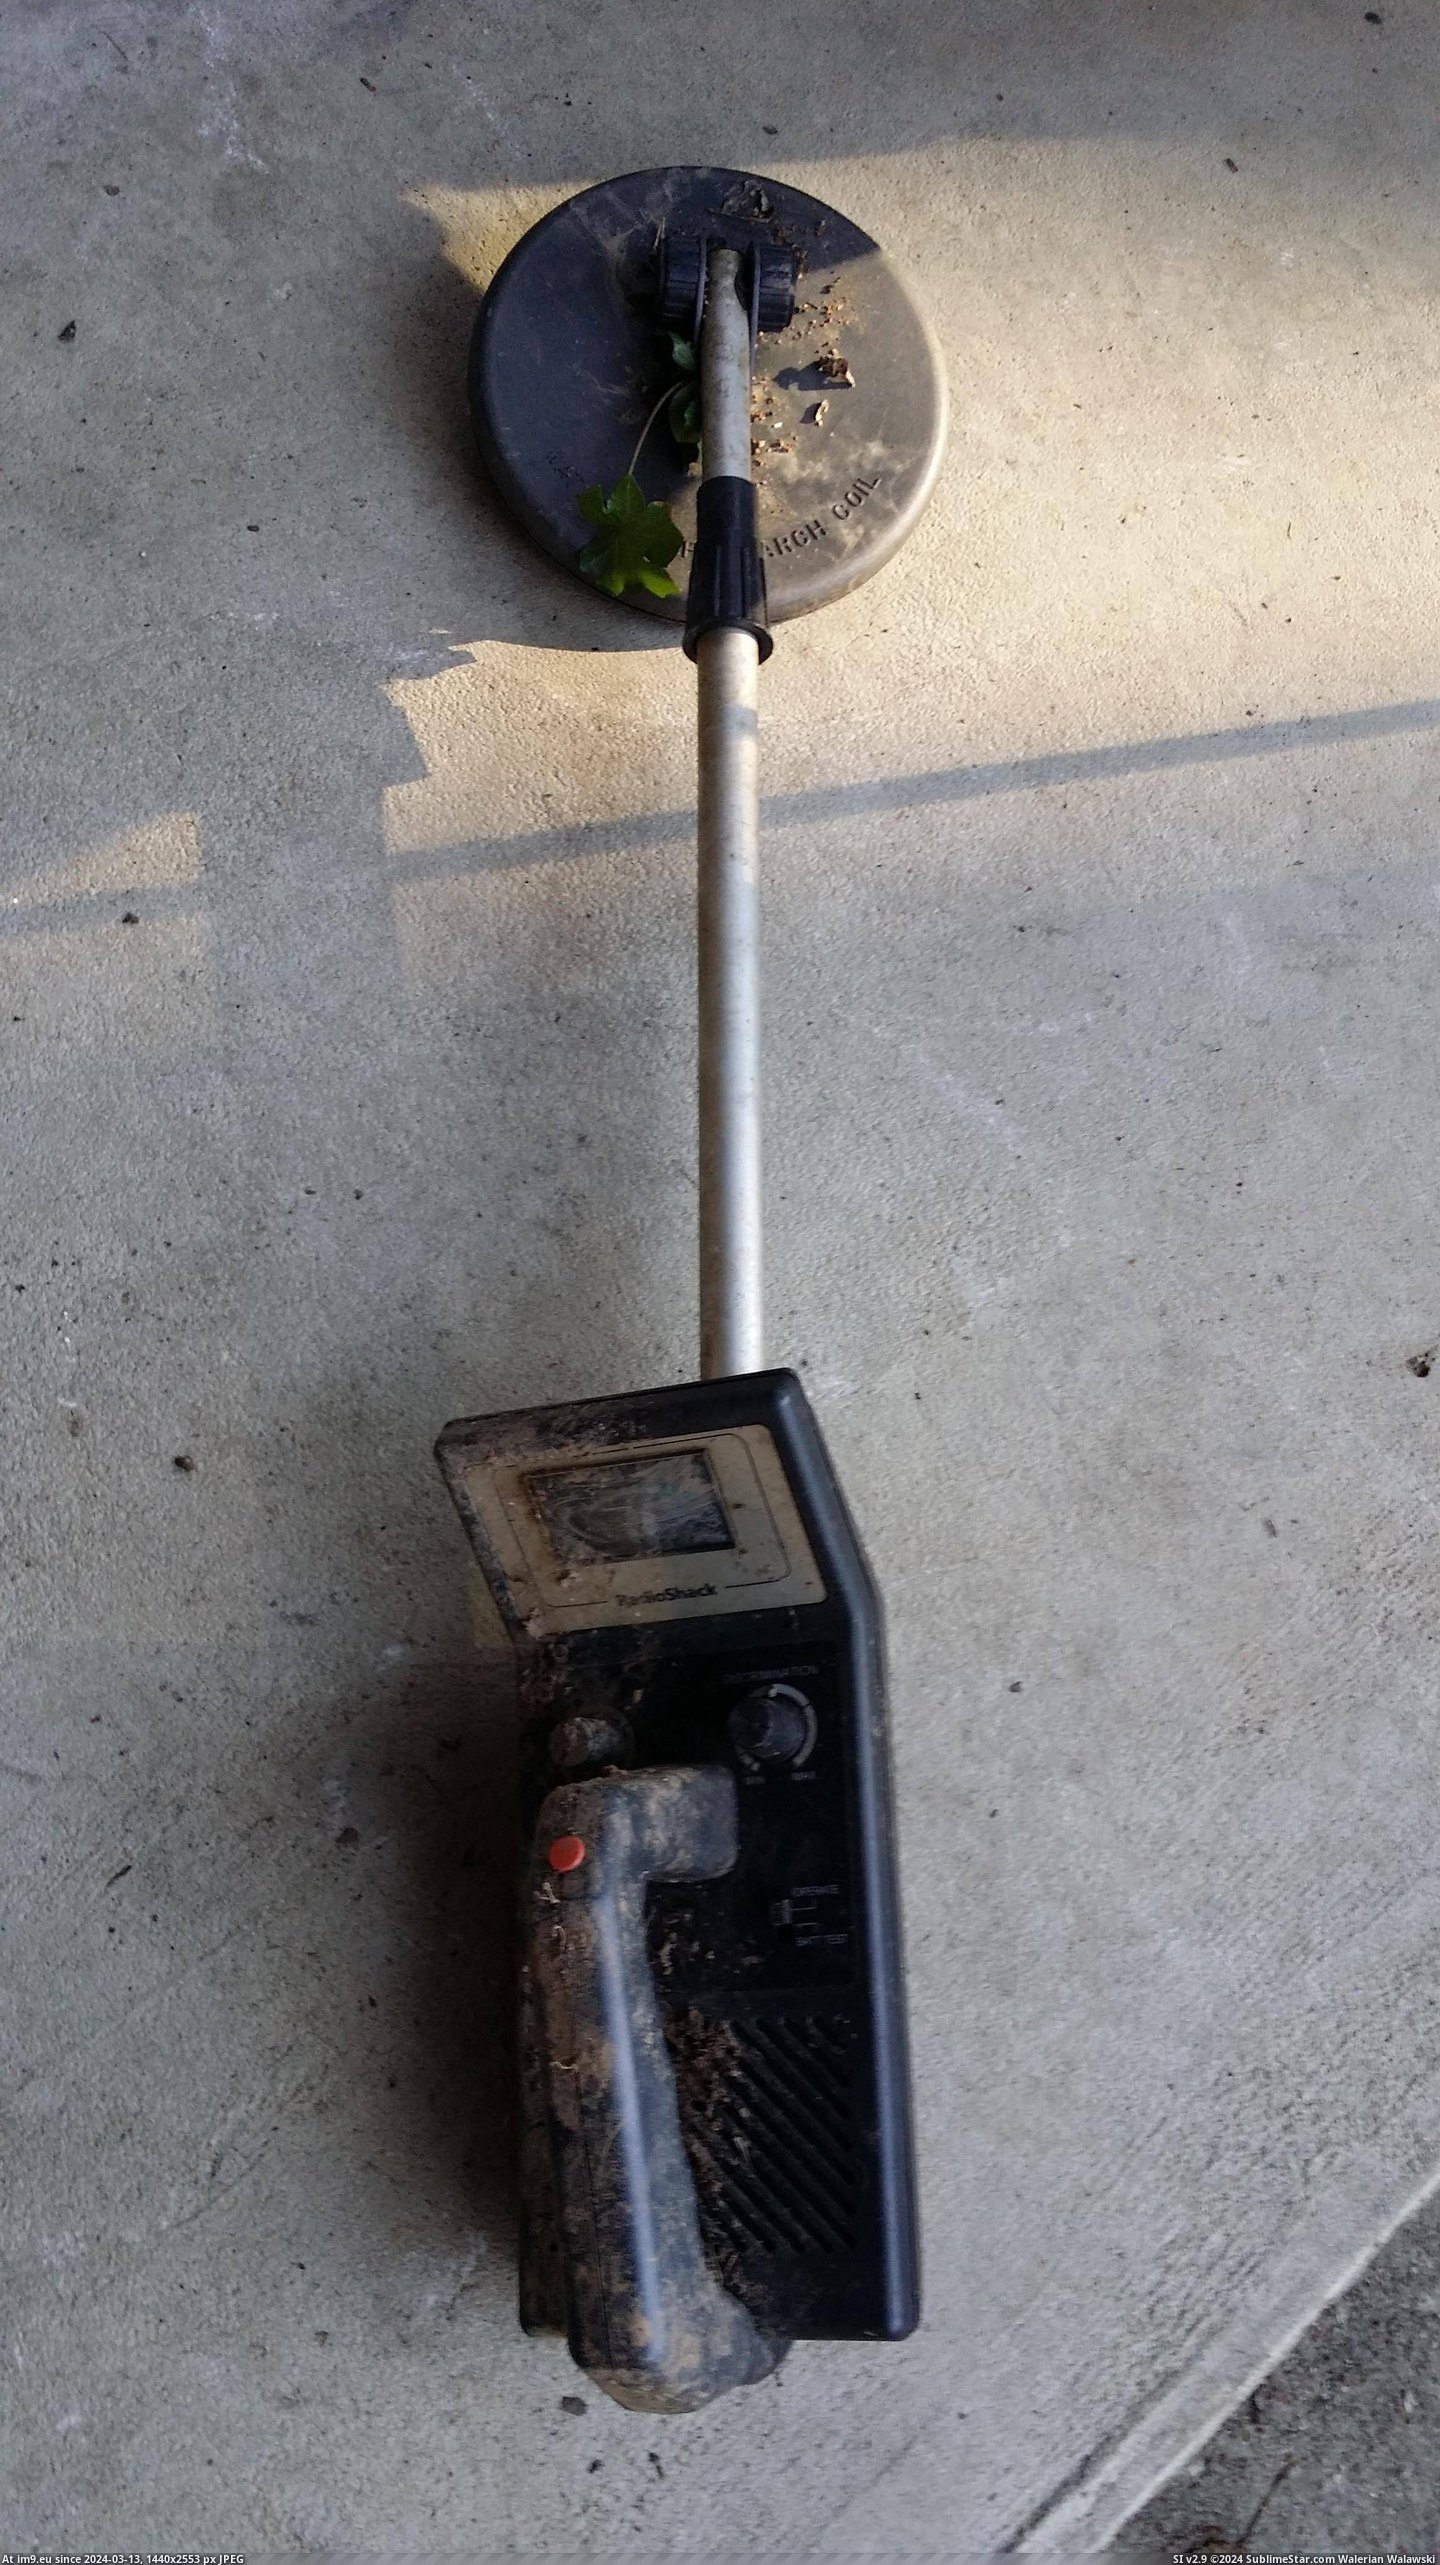 #Year #Old #Christmas #Received #Parent #Property #Son #Asked #Metal [Pics] My 11-year old son asked for & received a metal detector for Christmas. He took it out on my parent's property, and t Pic. (Obraz z album My r/PICS favs))